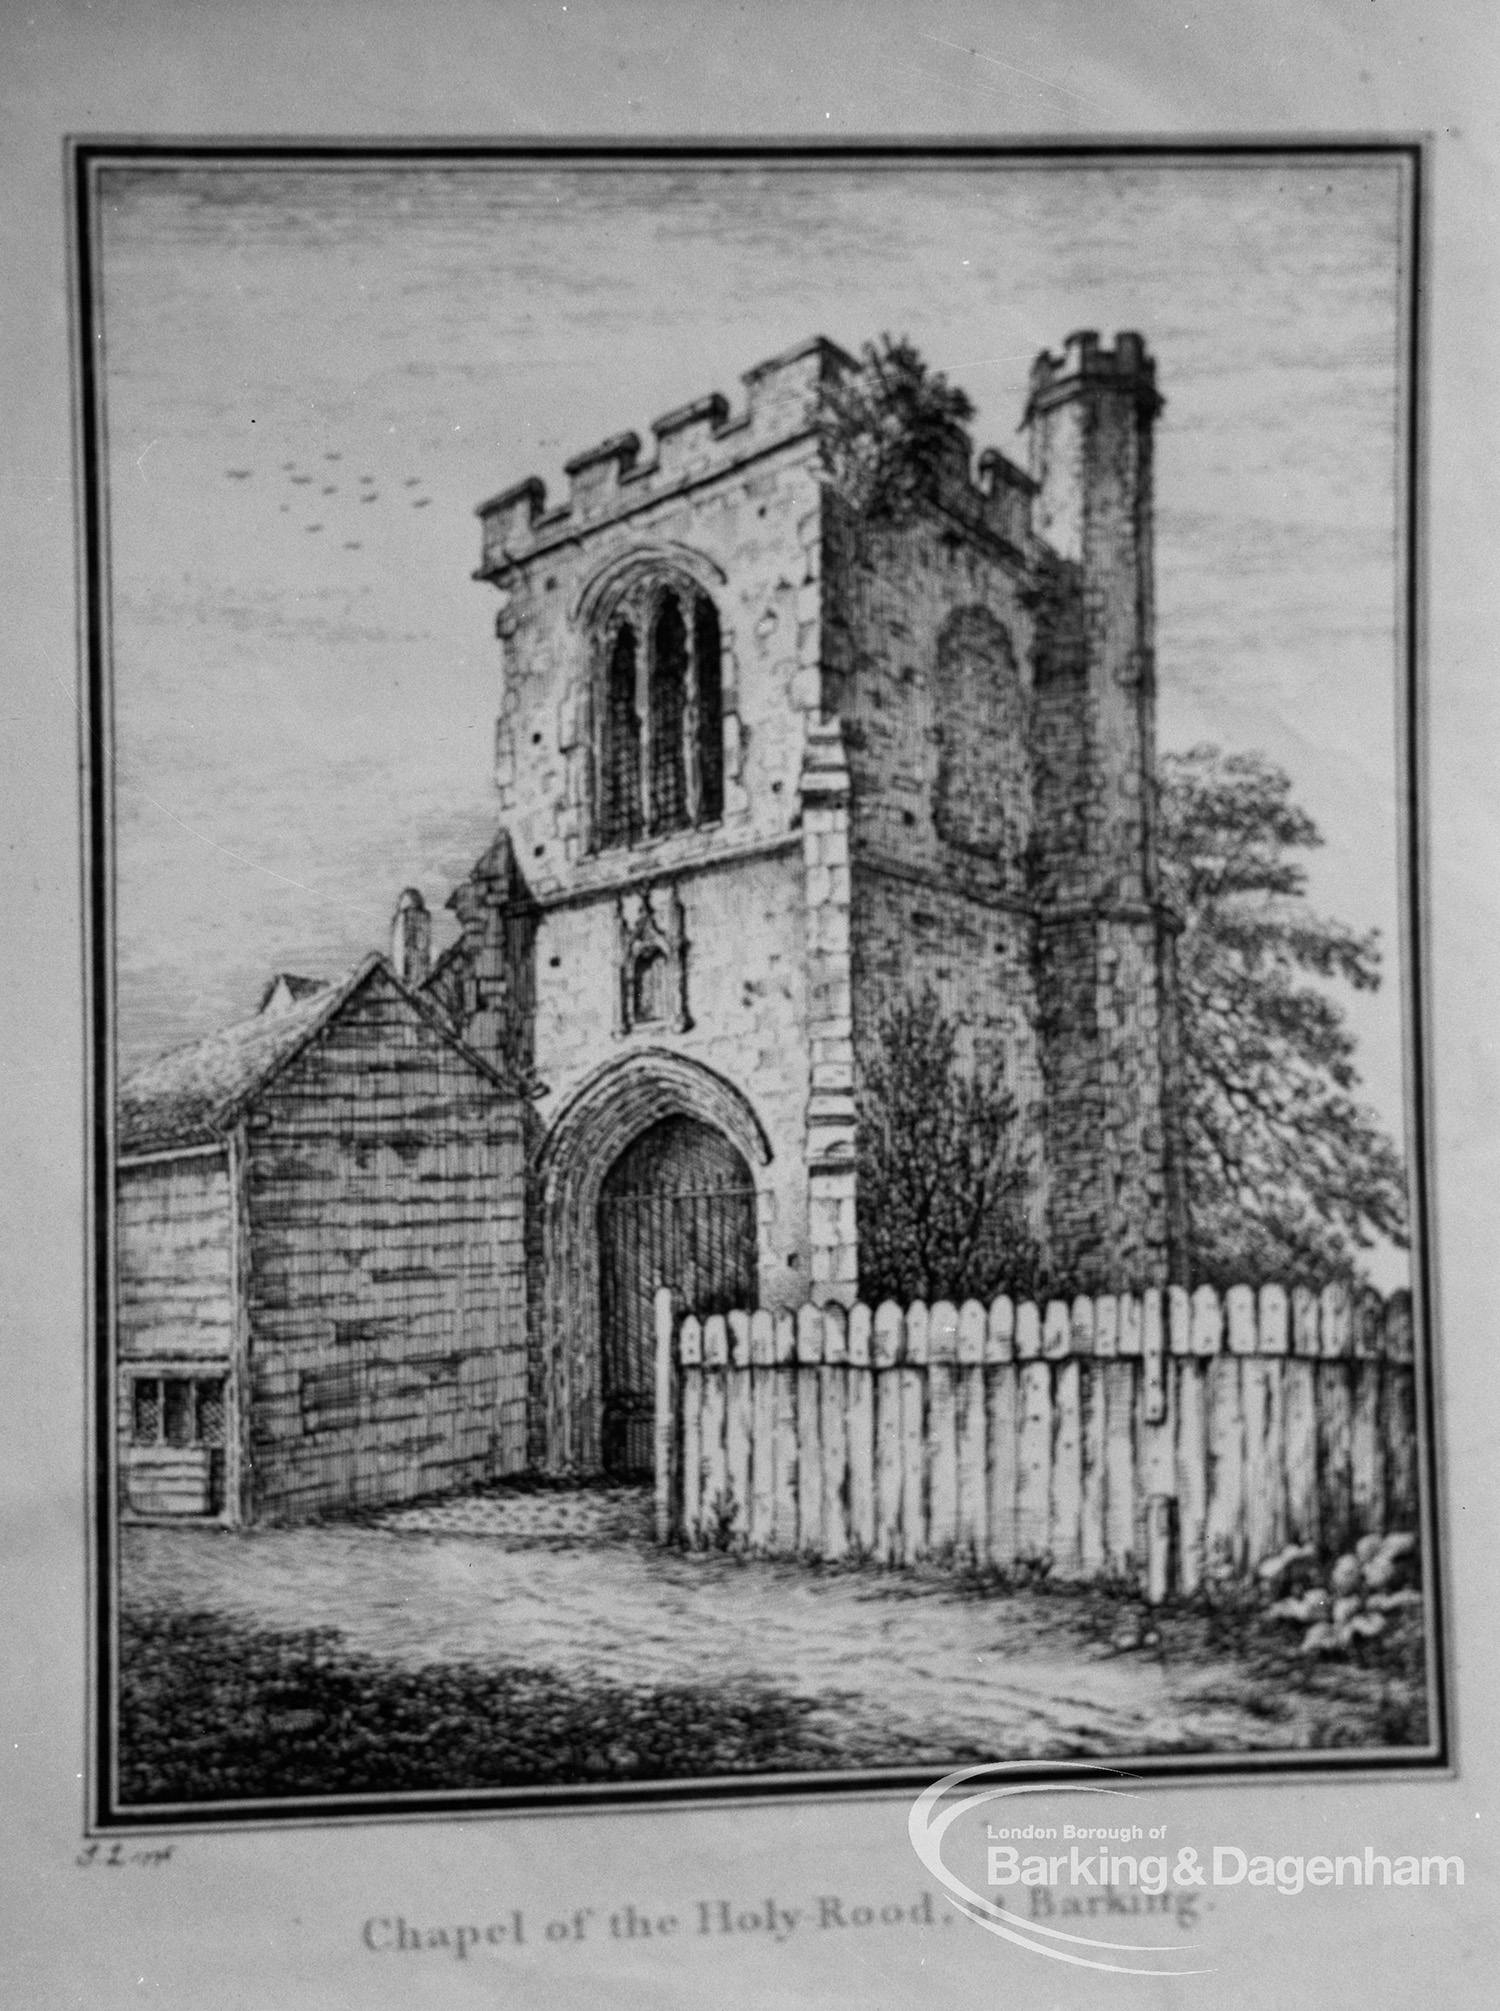 Chapel of the Holy Rood sketch from LBBD Archives